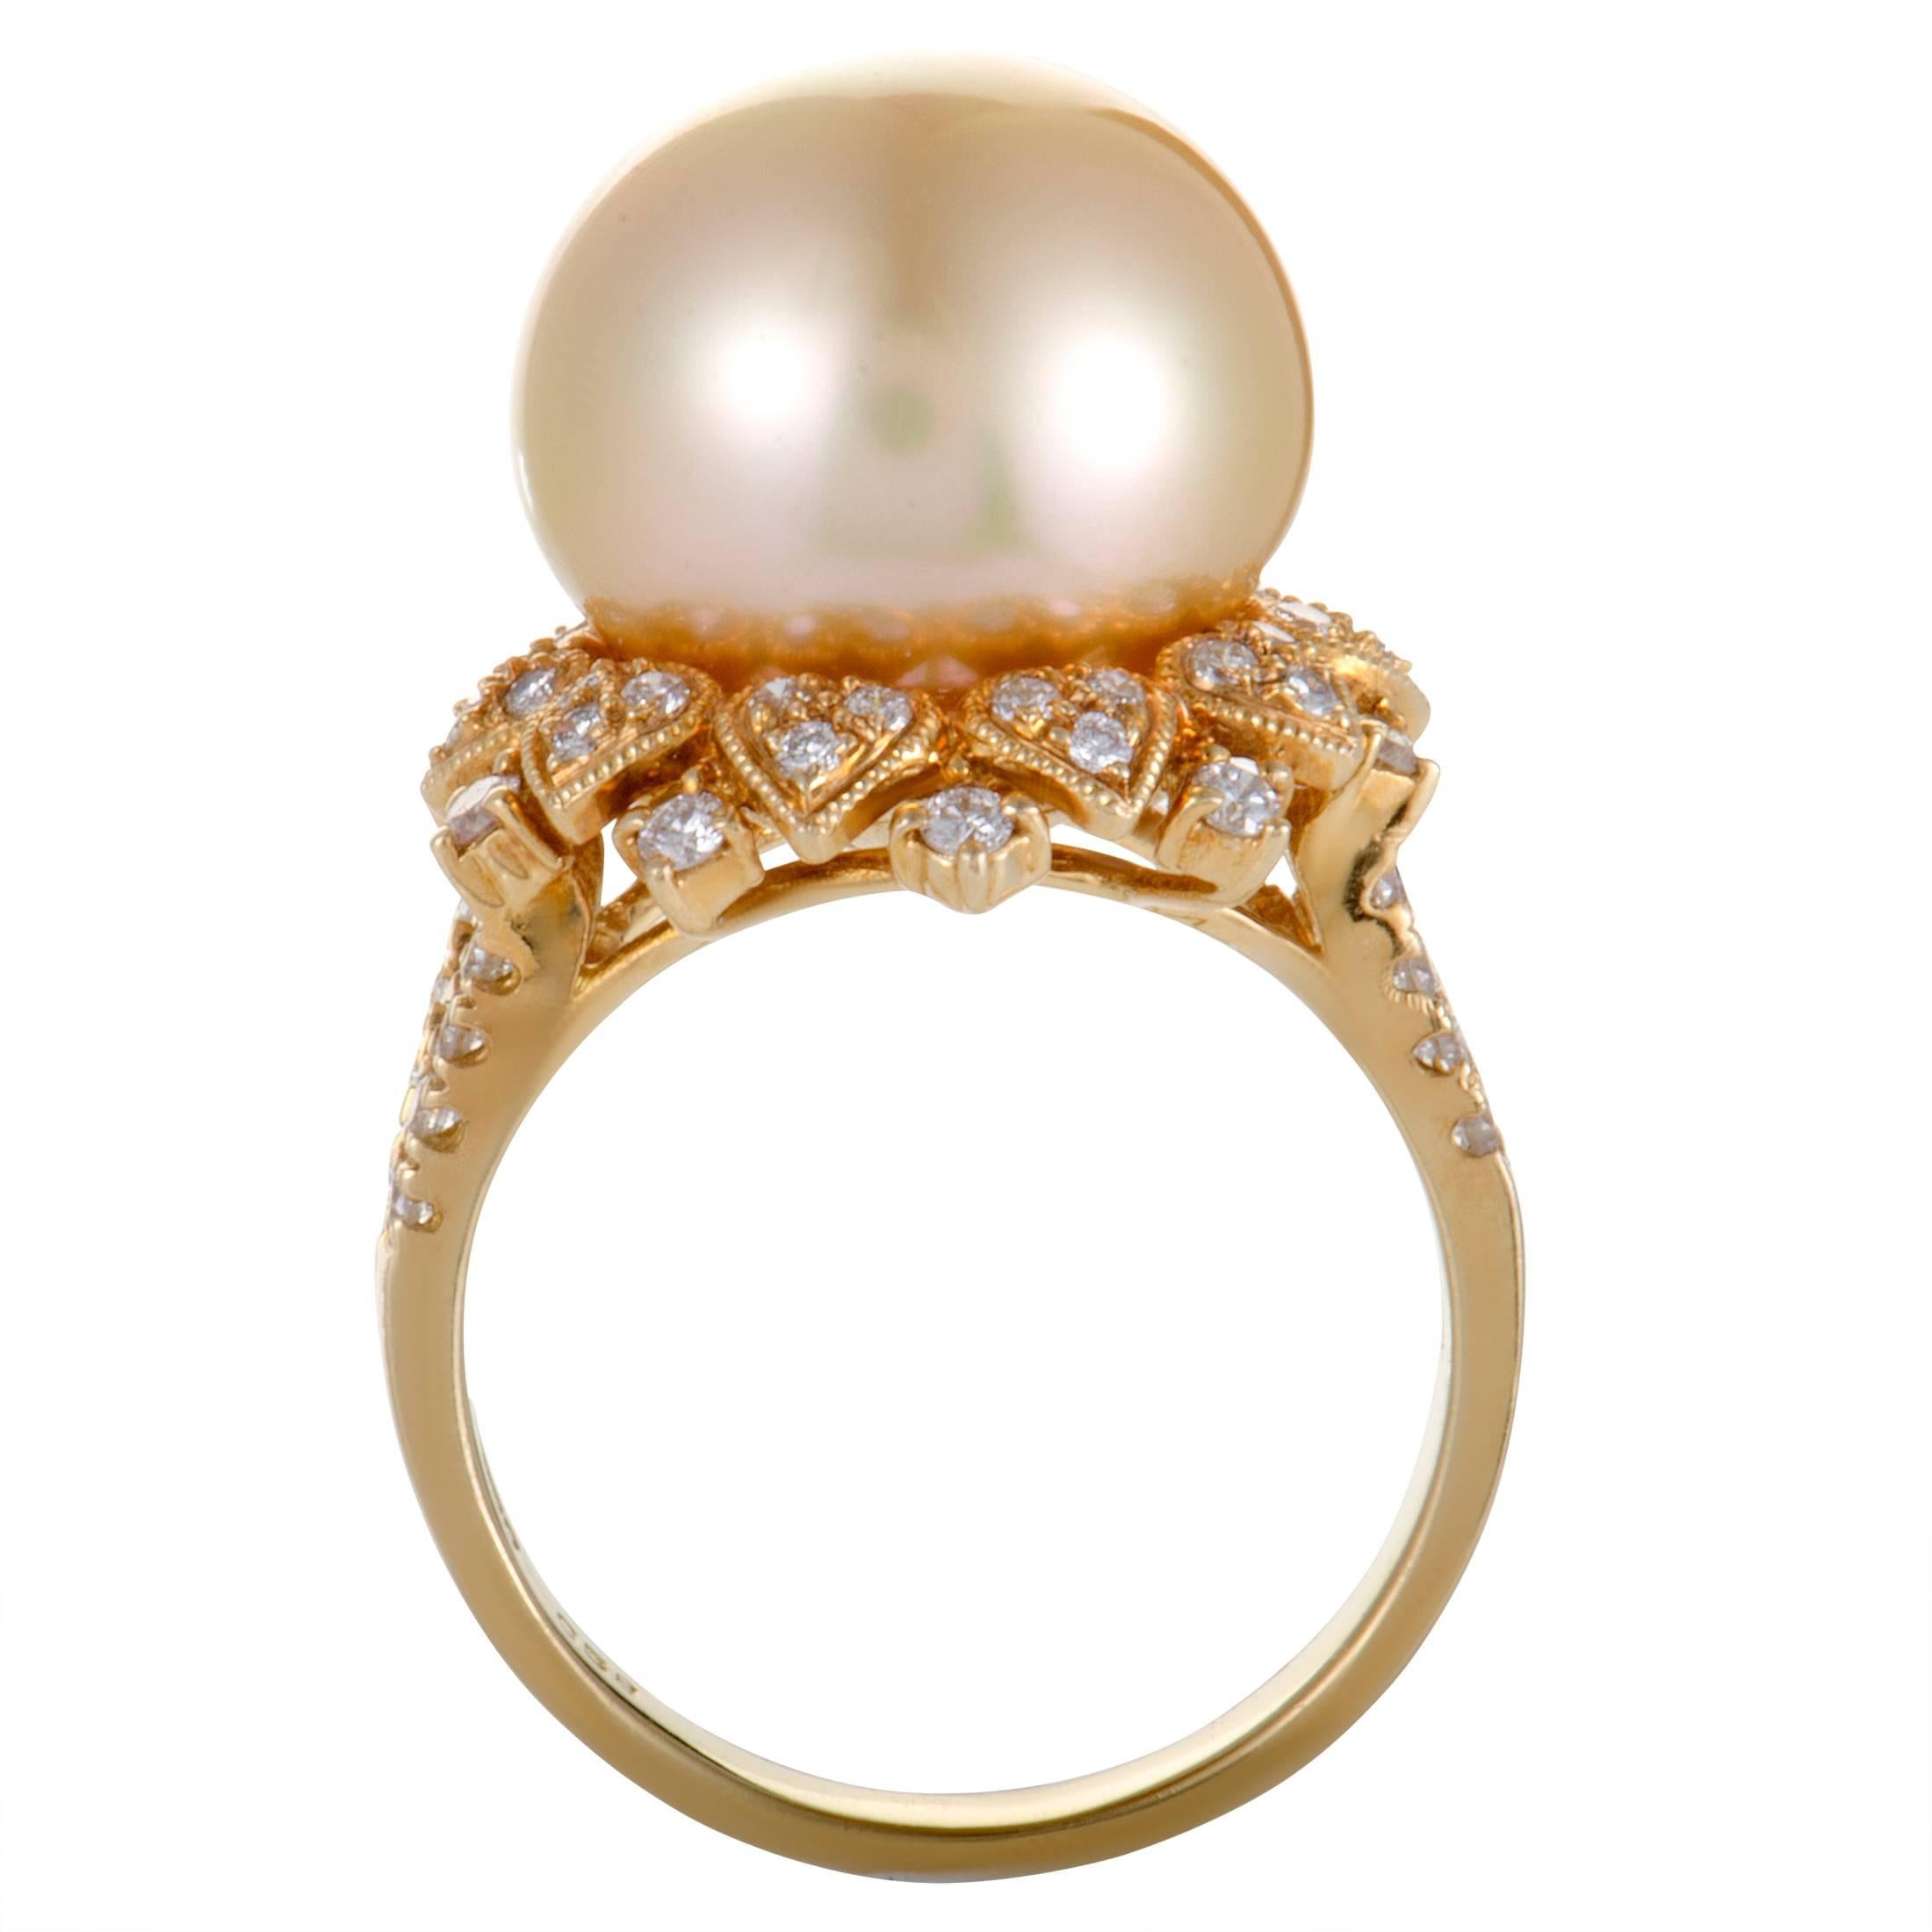 A charmingly antique feel is given to this lovely ring by the intricate design and classic décor. The ring is made of elegant 18K yellow gold and boasts a sublime pearl, its feminine allure enhanced by scintillating diamonds that total 0.58